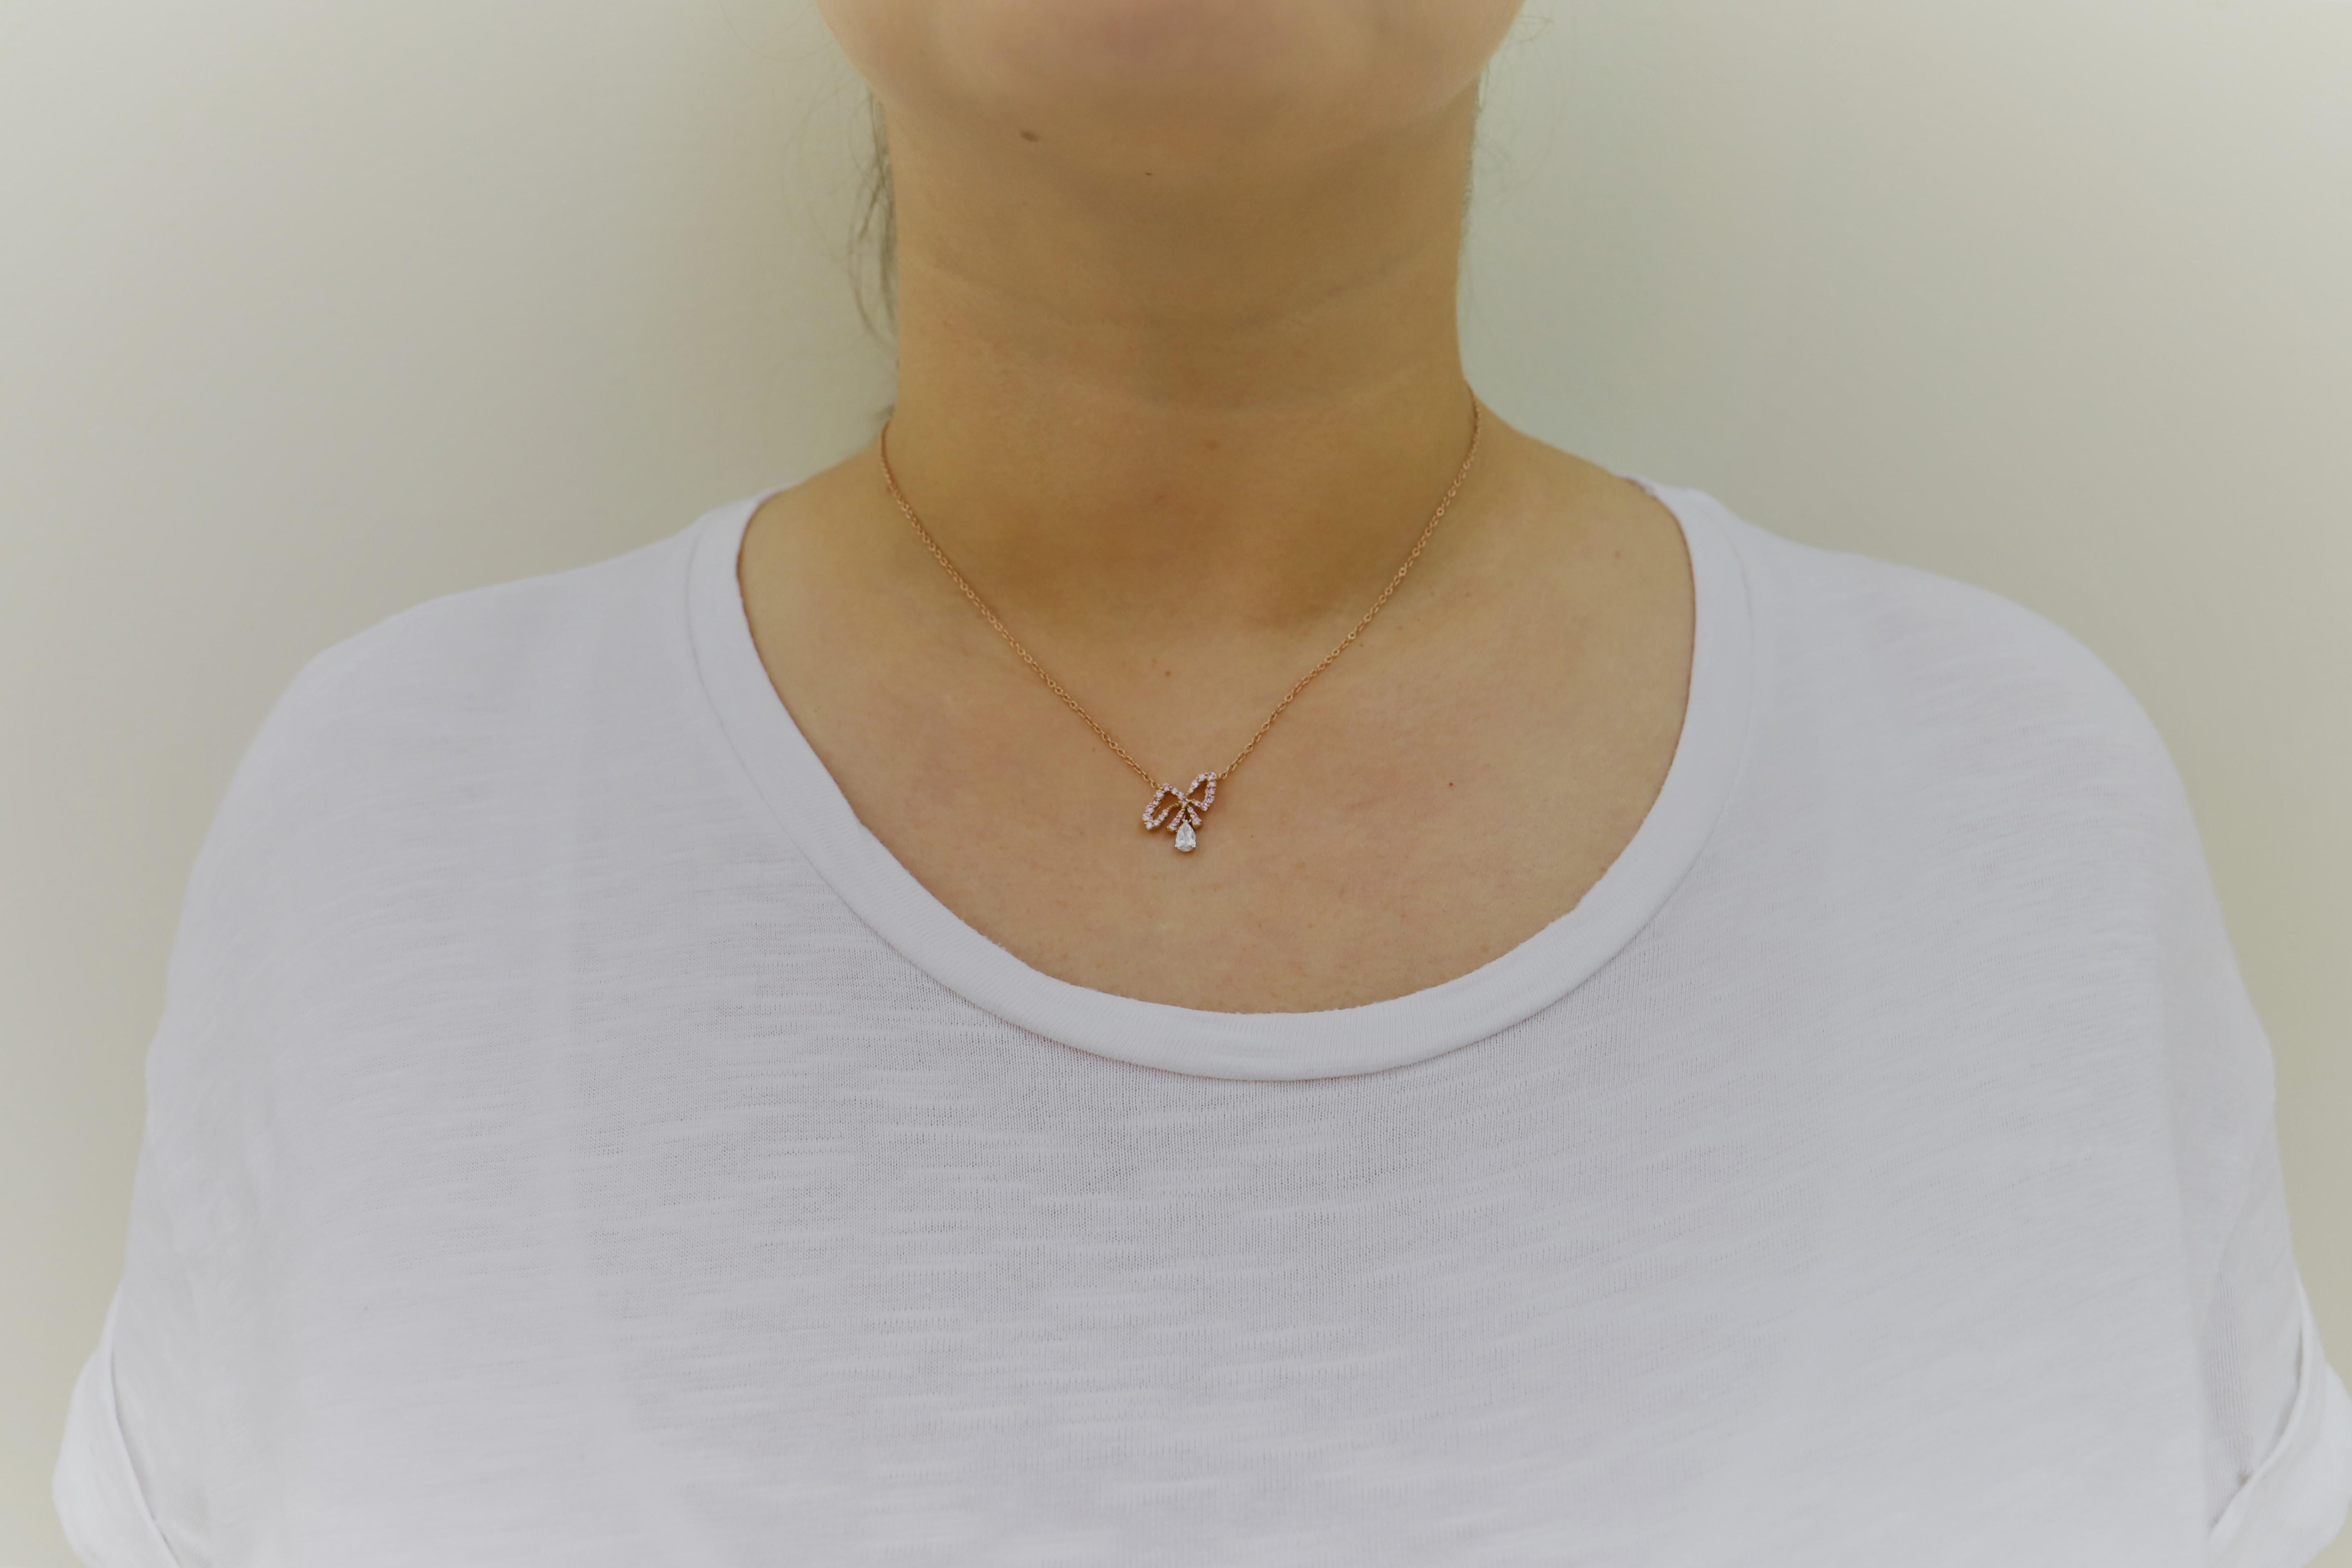 Pendant Necklace in 18KT pink gold featuring 28pcs Argyle Pink Diamonds for 0.27 Carat shaping a Bow, with a White Pear Sahpe Diamond of 0.26 ct dangling.
Simple and elegant, for all ages.

Argyle Pink Diamonds, produced at Rio Tinto's Argyle